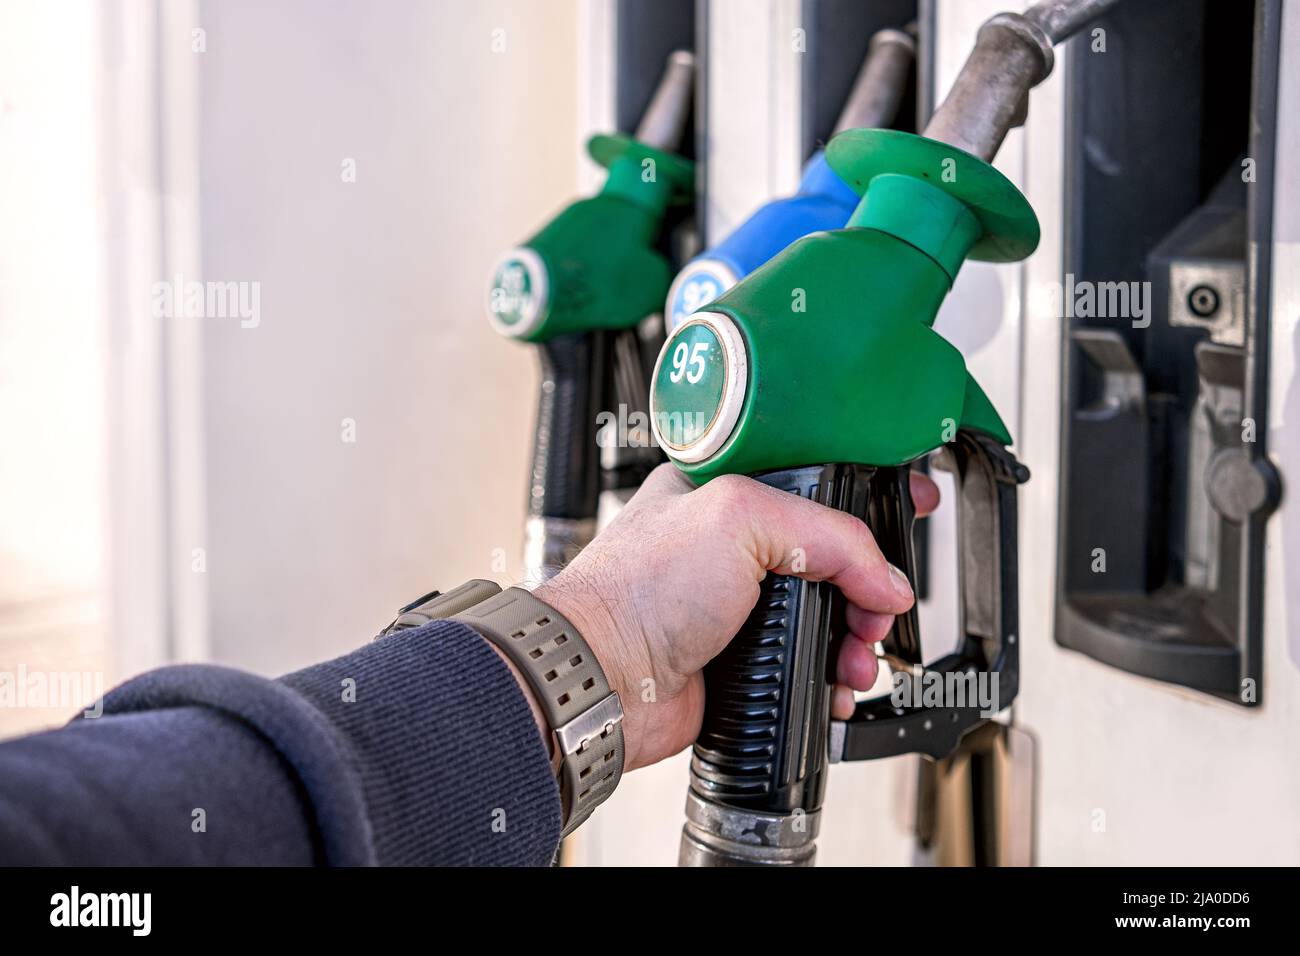 A man is about to start filling up a car with gasoline at a gas station. Stock Photo